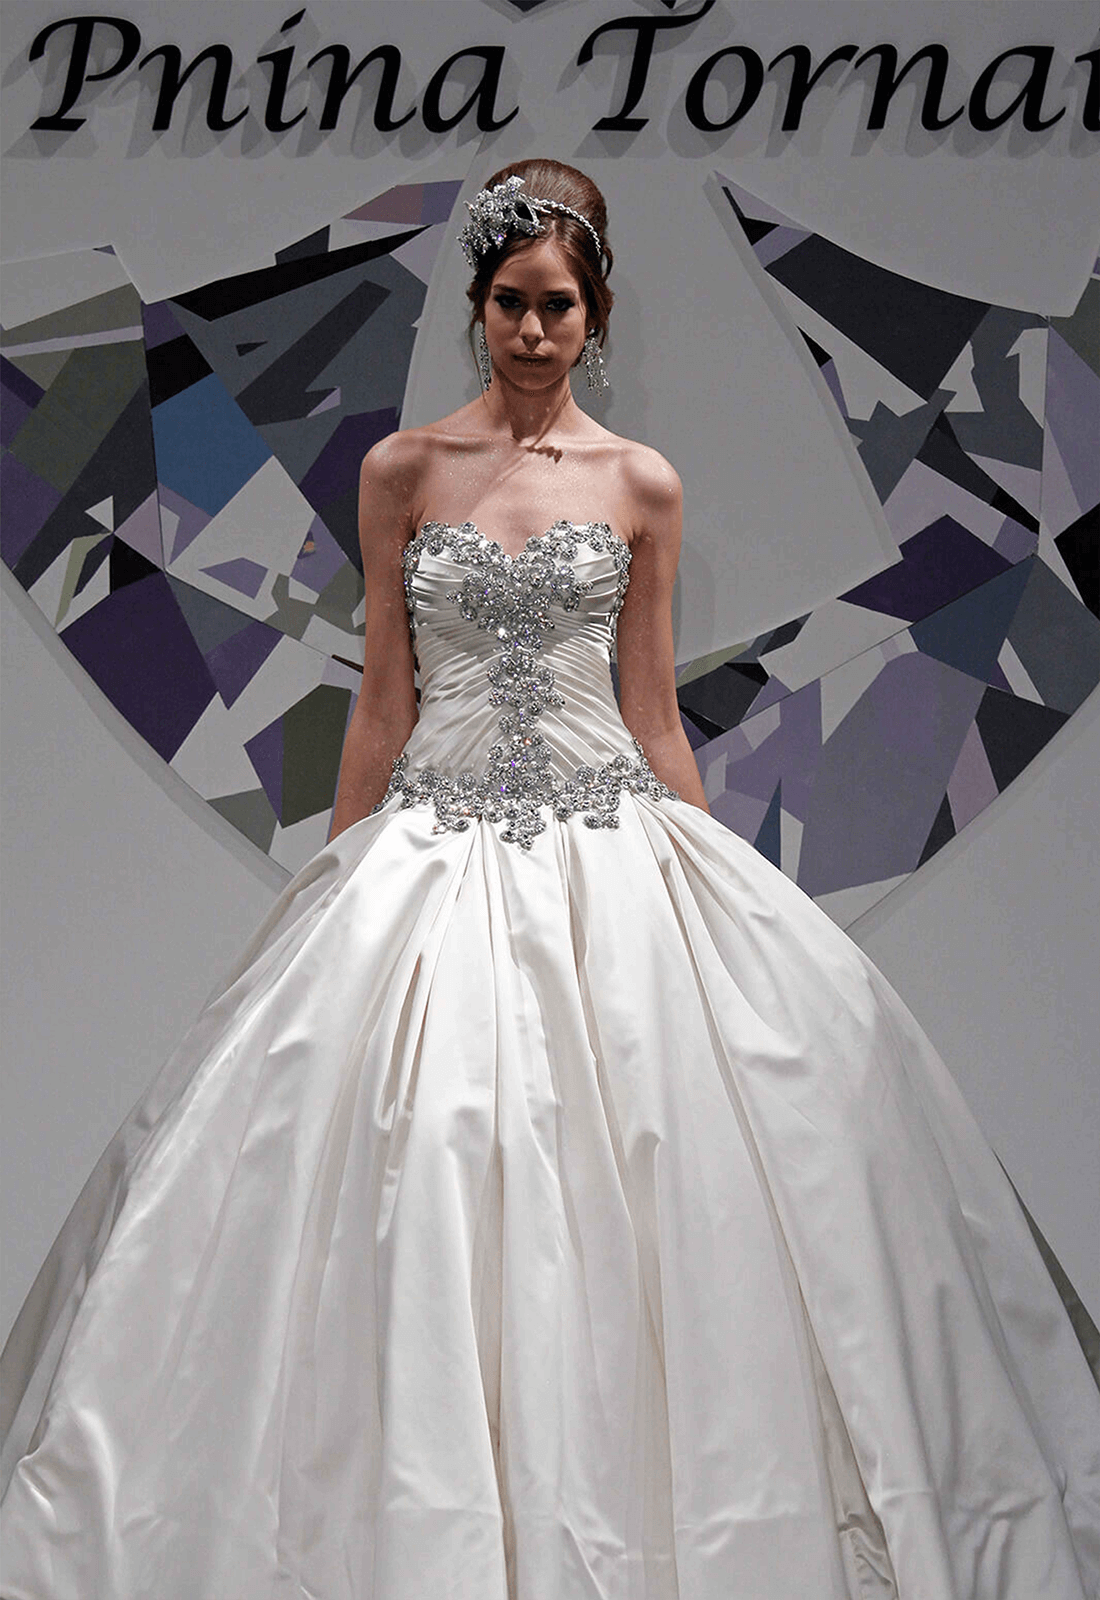 What is the name of this dress? I believe it's Pnina Tornai. TIA